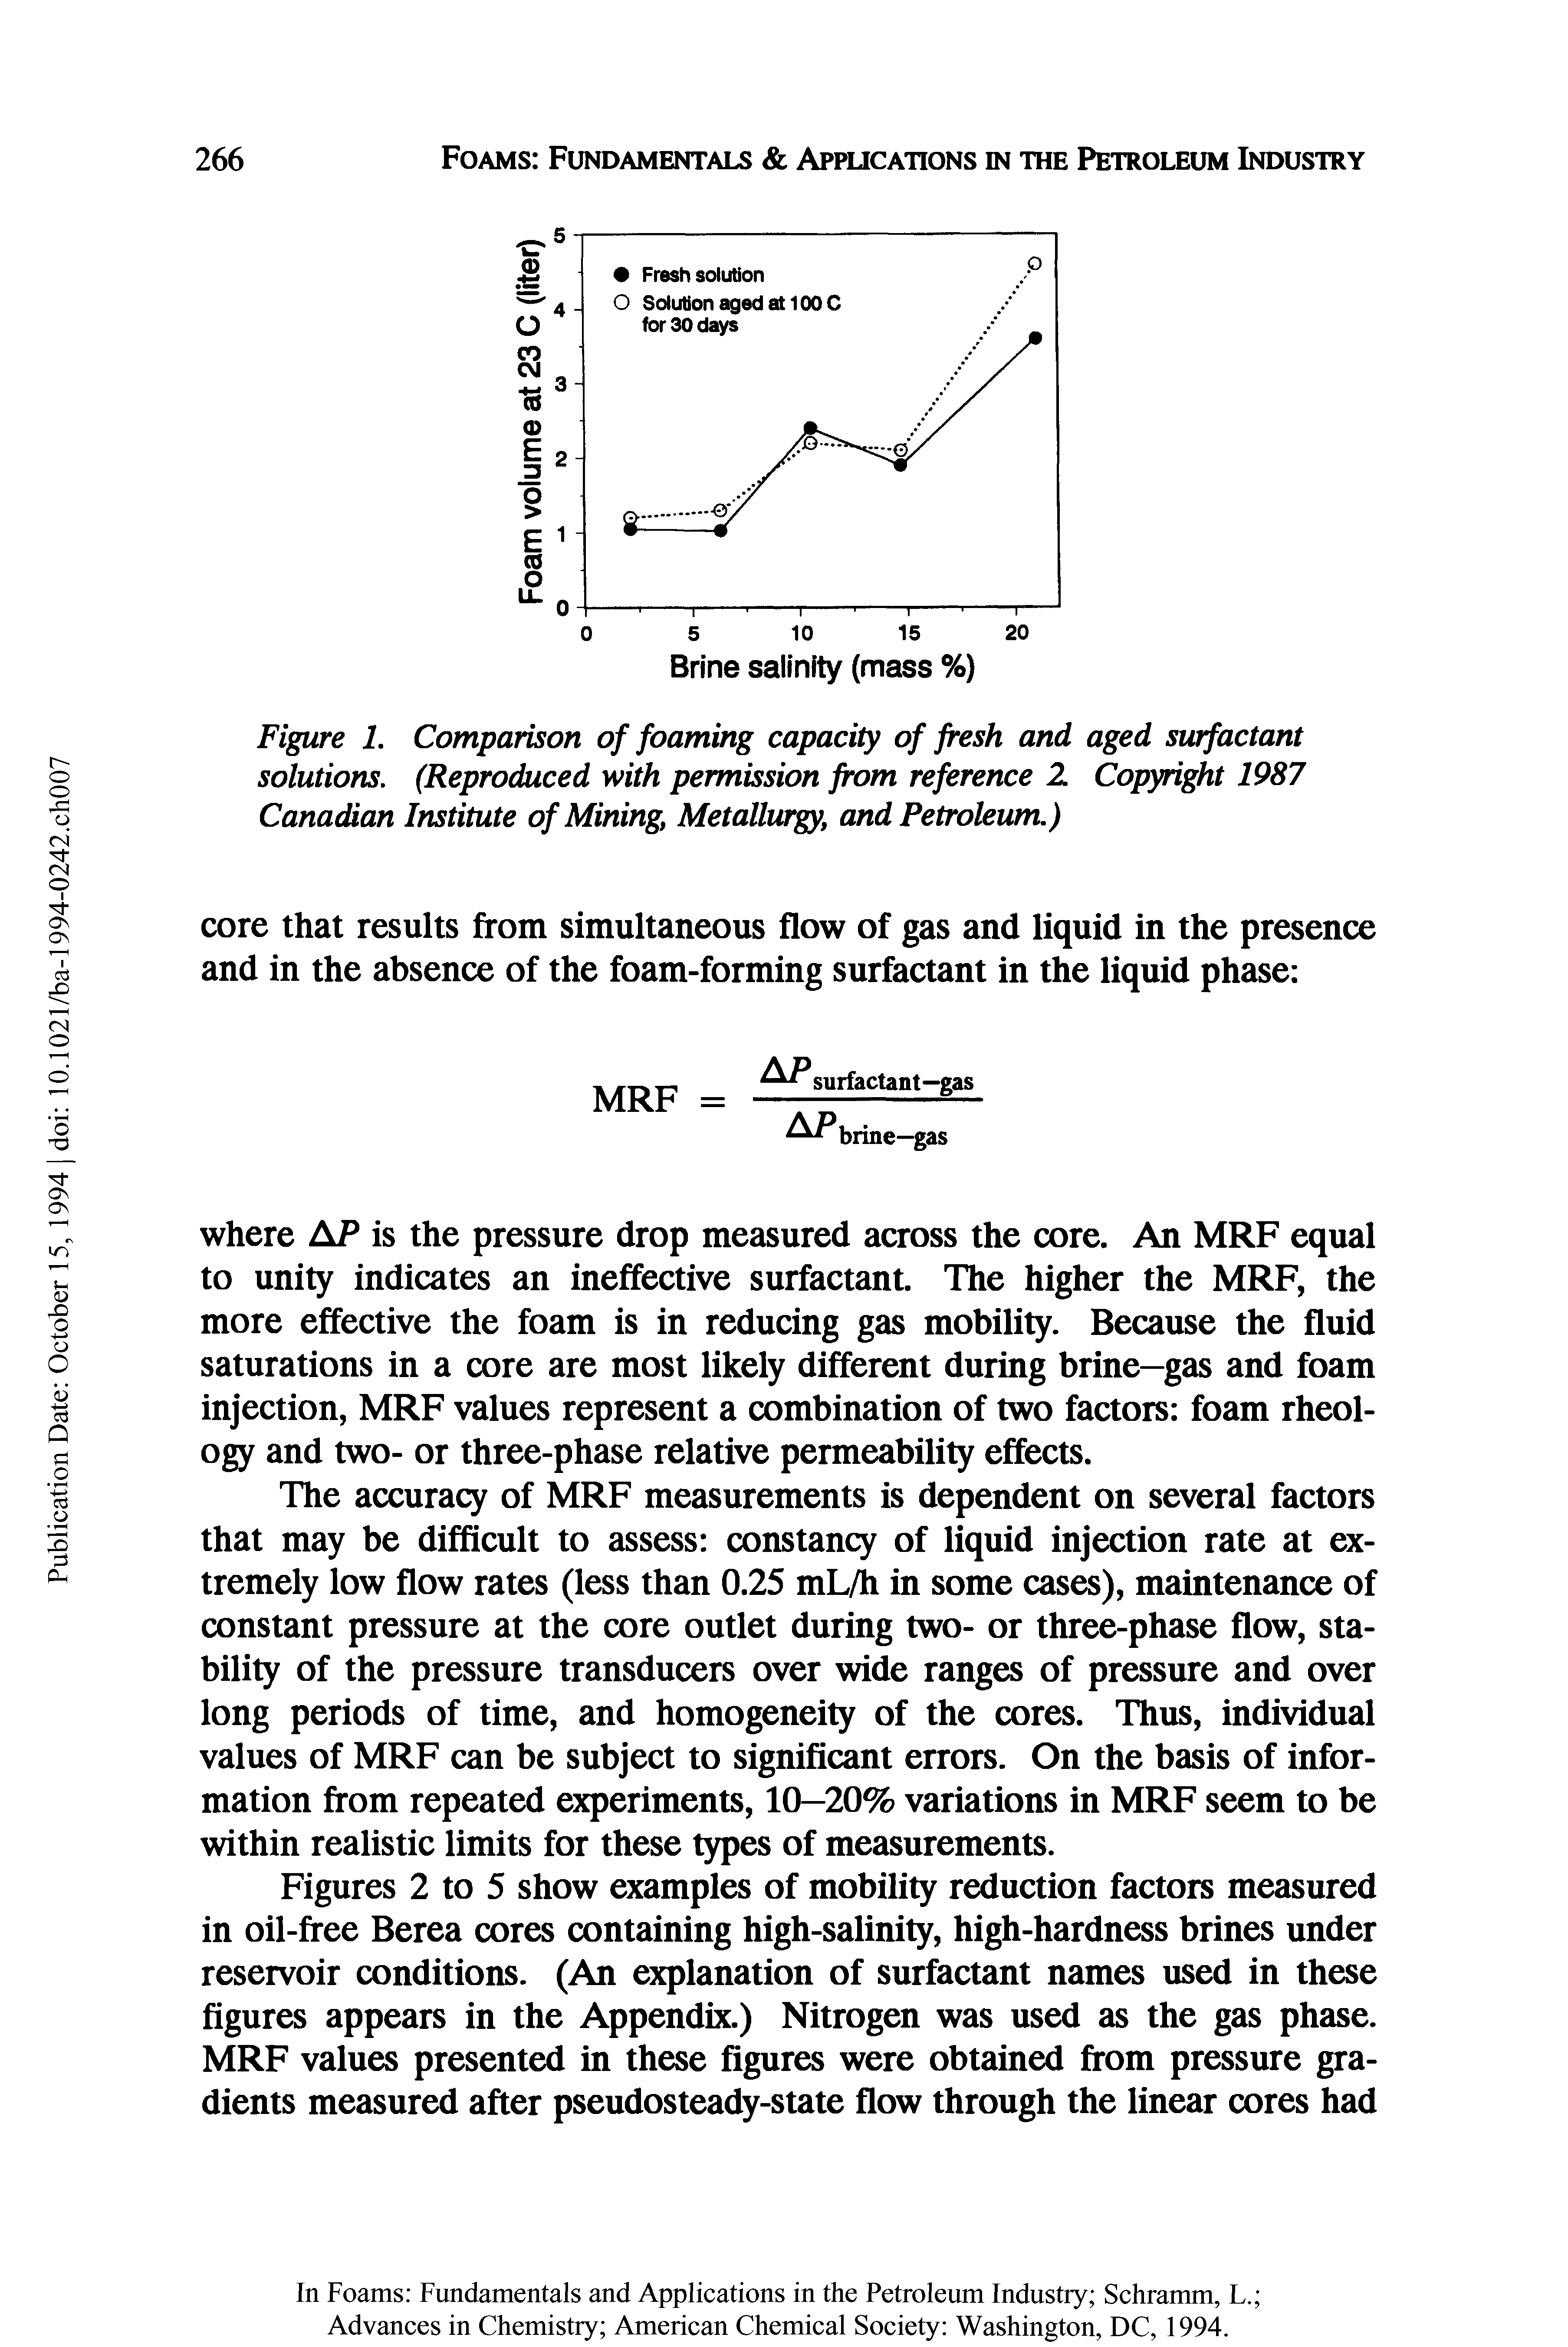 Figures 2 to 5 show examples of mobility reduction factors measured in oil-free Berea cores containing high-salinity, high-hardness brines under reservoir conditions. (An explanation of surfactant names used in these figures appears in the Appendix.) Nitrogen was used as the gas phase. MRF values presented in these figures were obtained from pressure gradients measured after pseudosteady-state flow through the linear cores had...